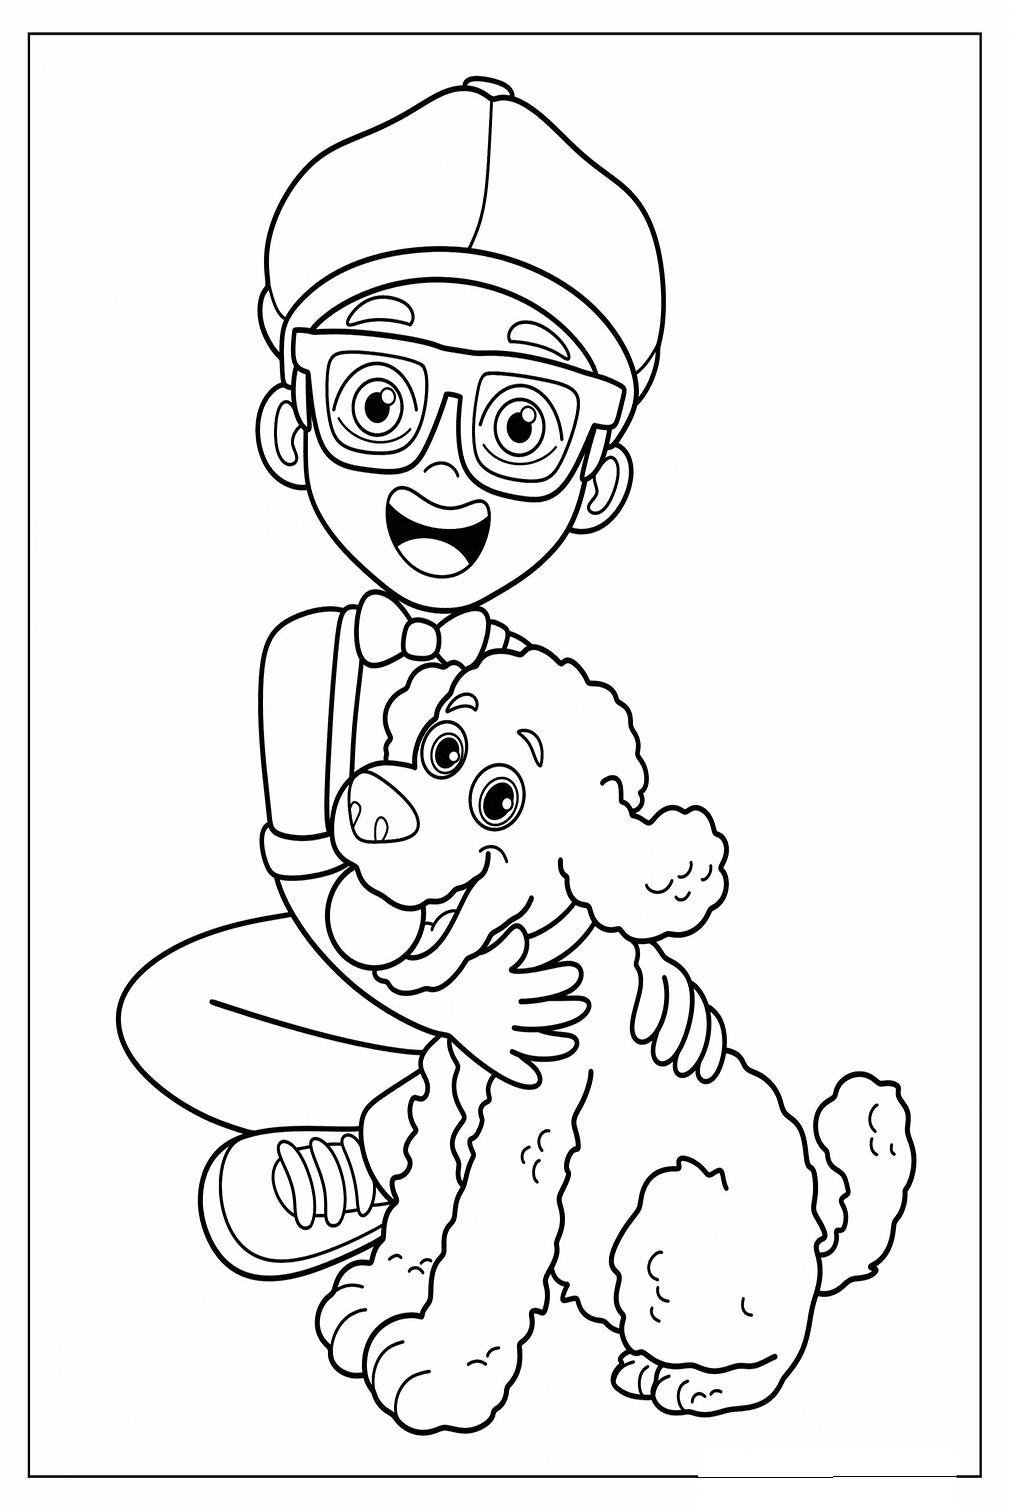 Young blippi coloring page